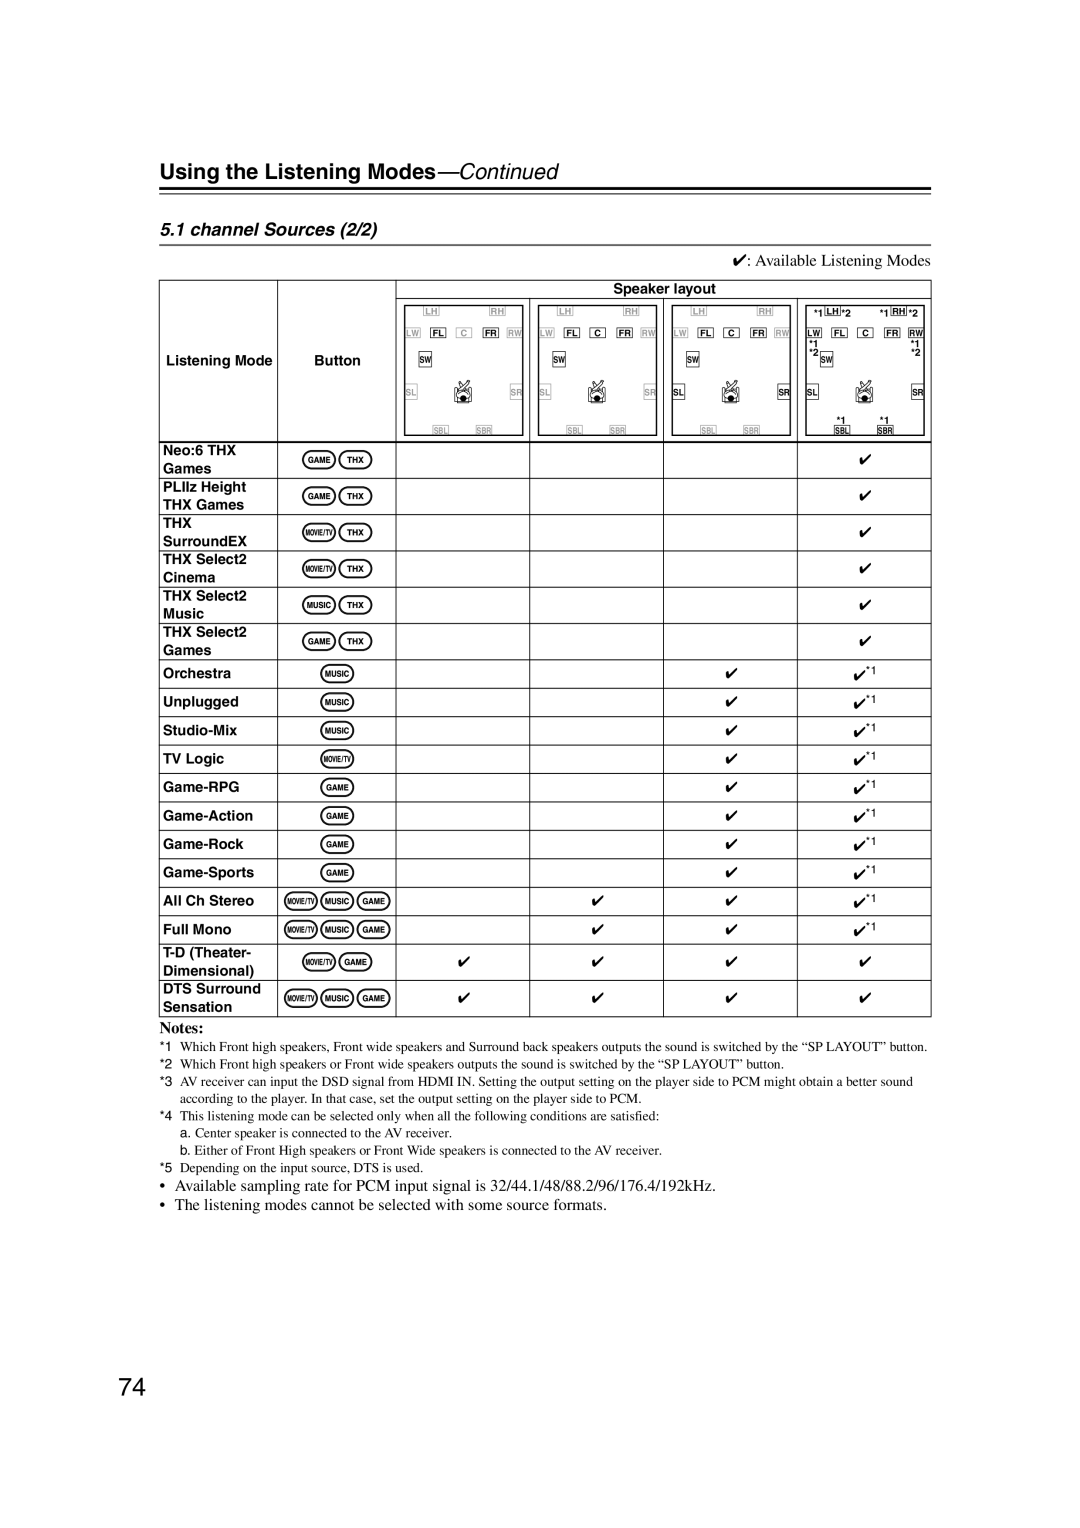 Onkyo TX-SR707 instruction manual channel Sources 2/2, Using the Listening Modes—Continued 